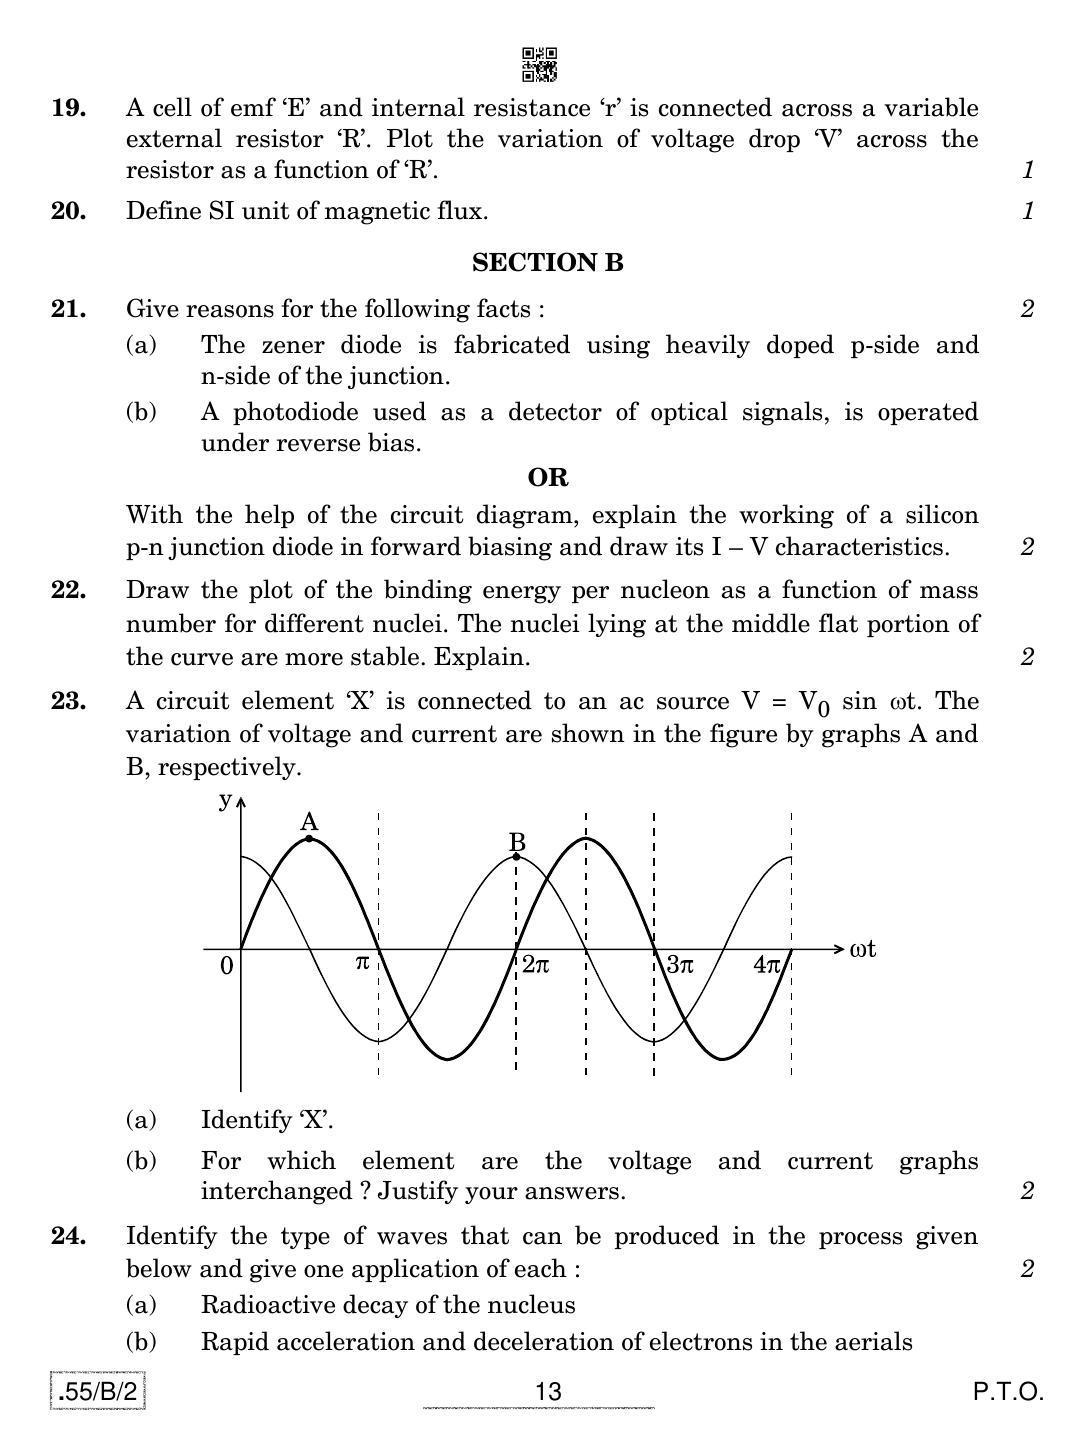 CBSE Class 12 55-C-2 - Physics 2020 Compartment Question Paper - Page 13